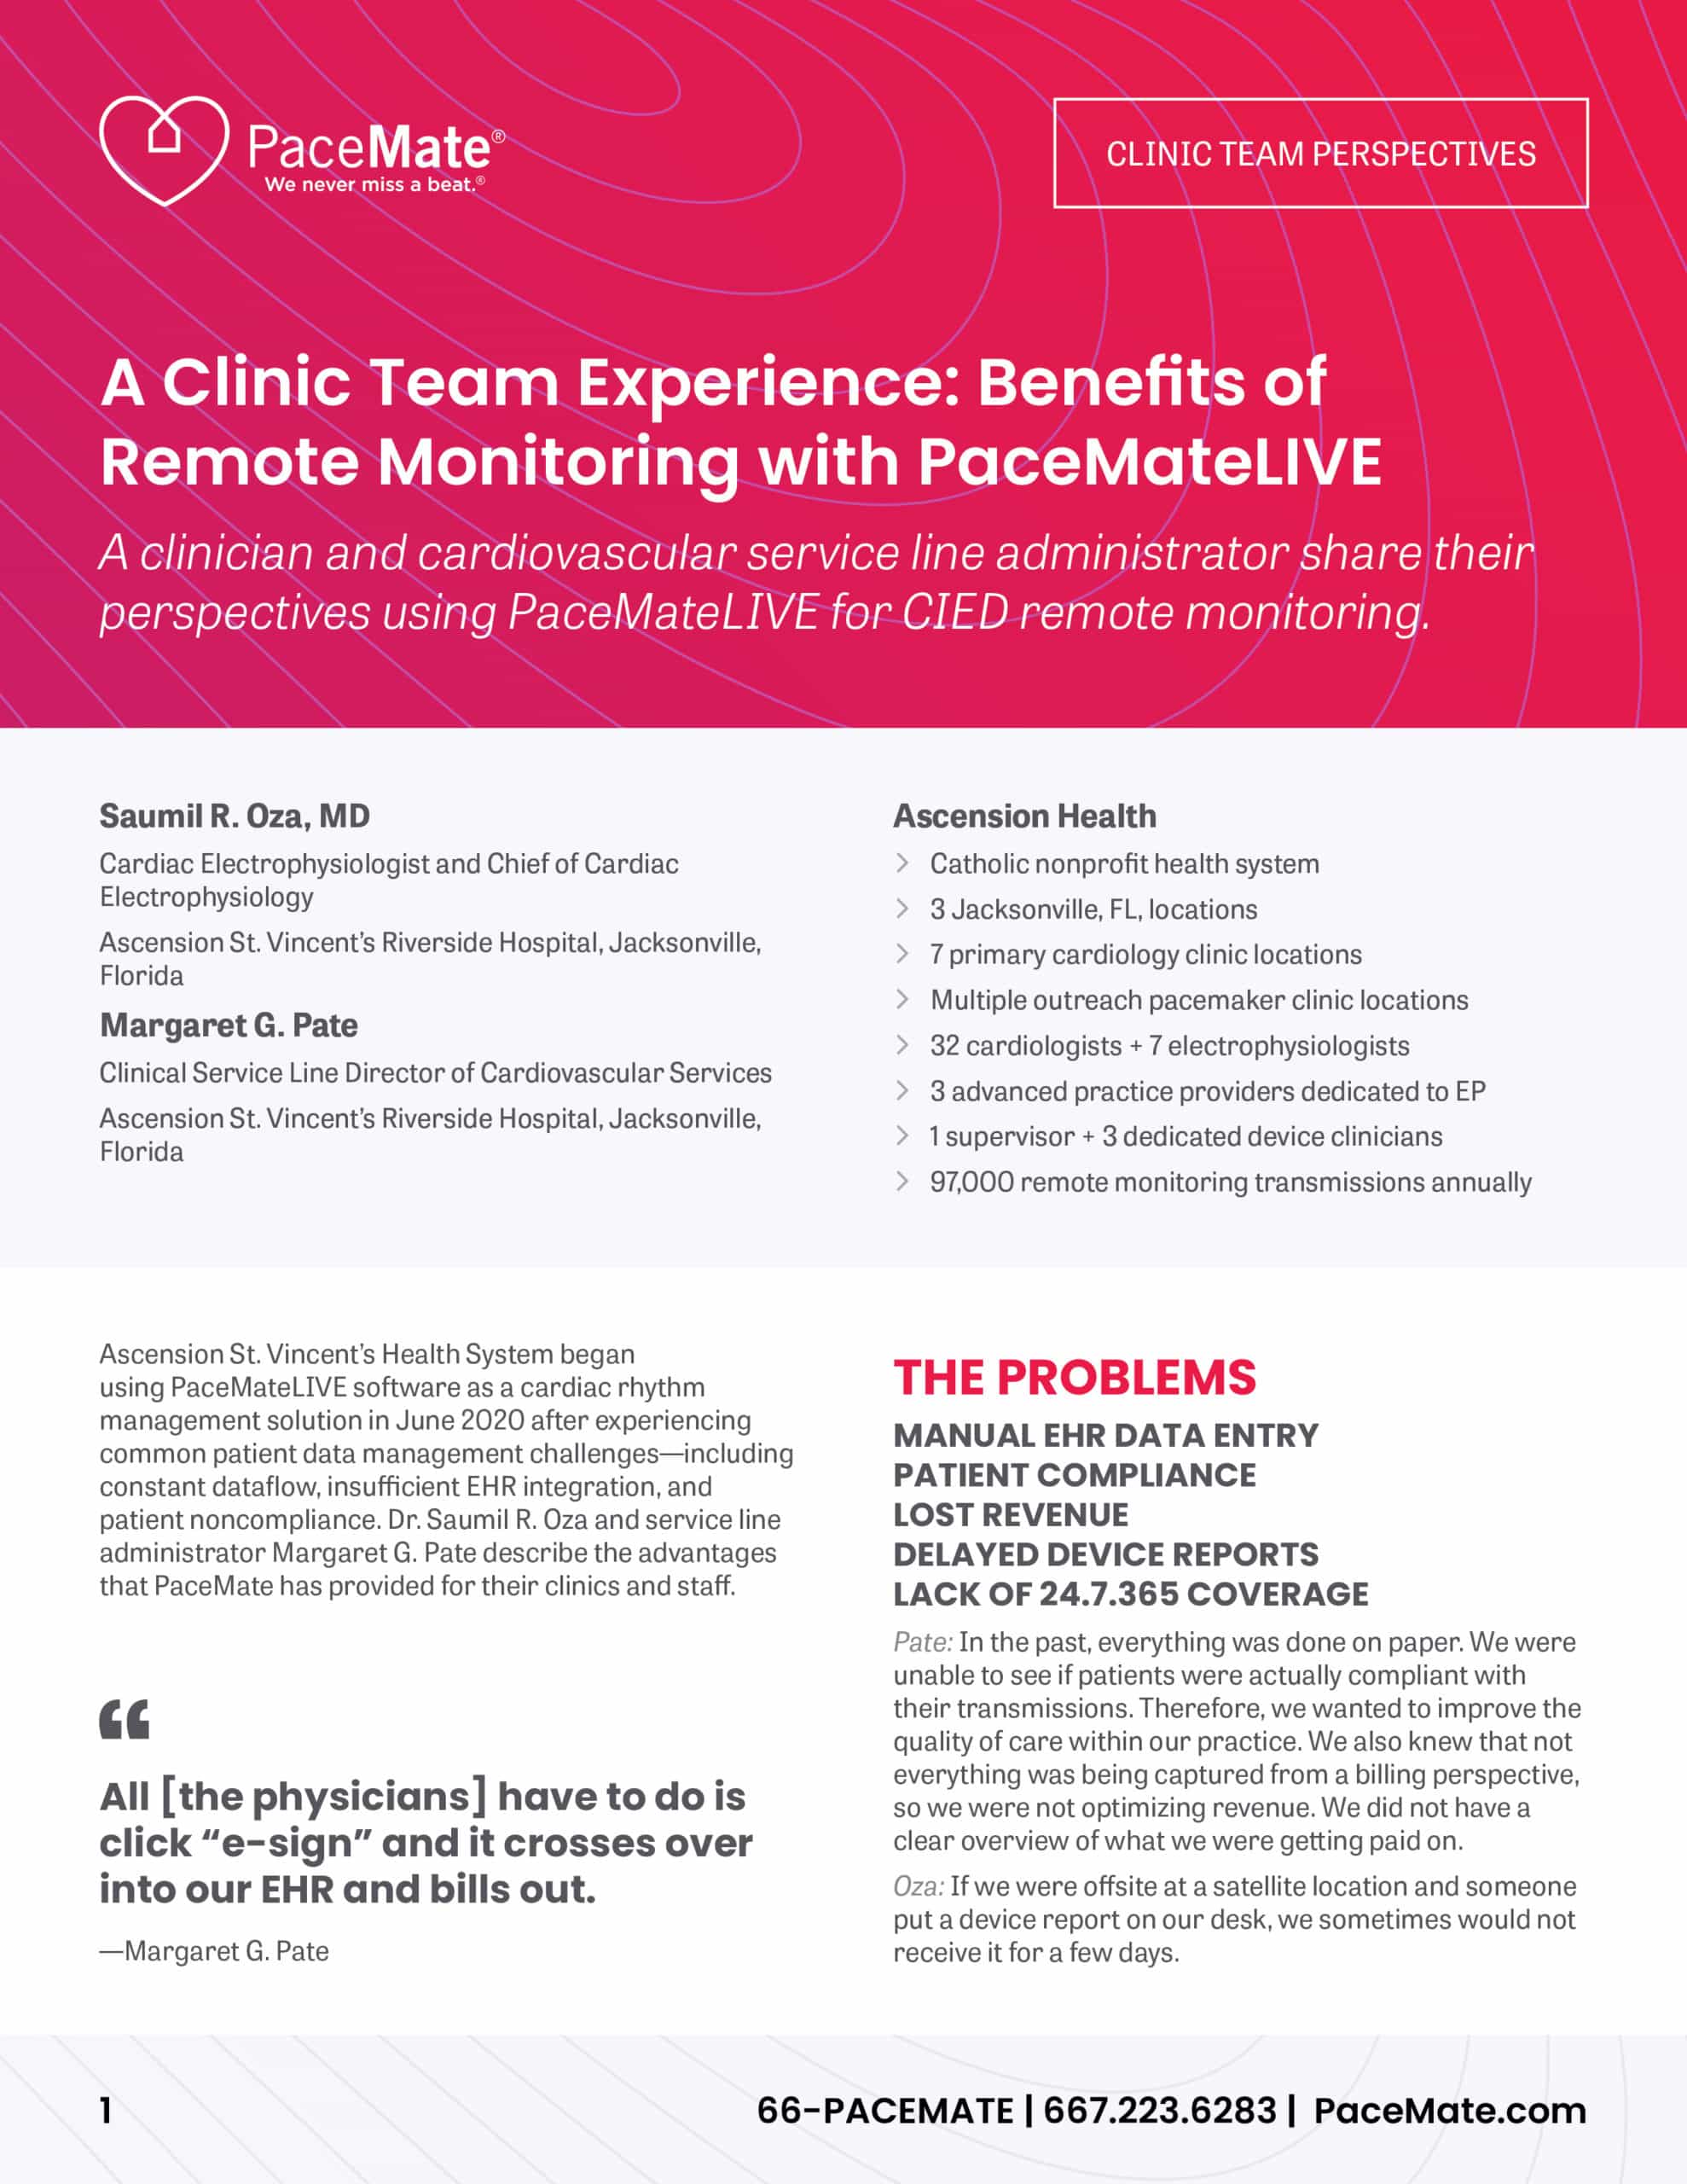 A Clinic Team Experience: Benefits of Remote Monitoring with PaceMate®LIVE